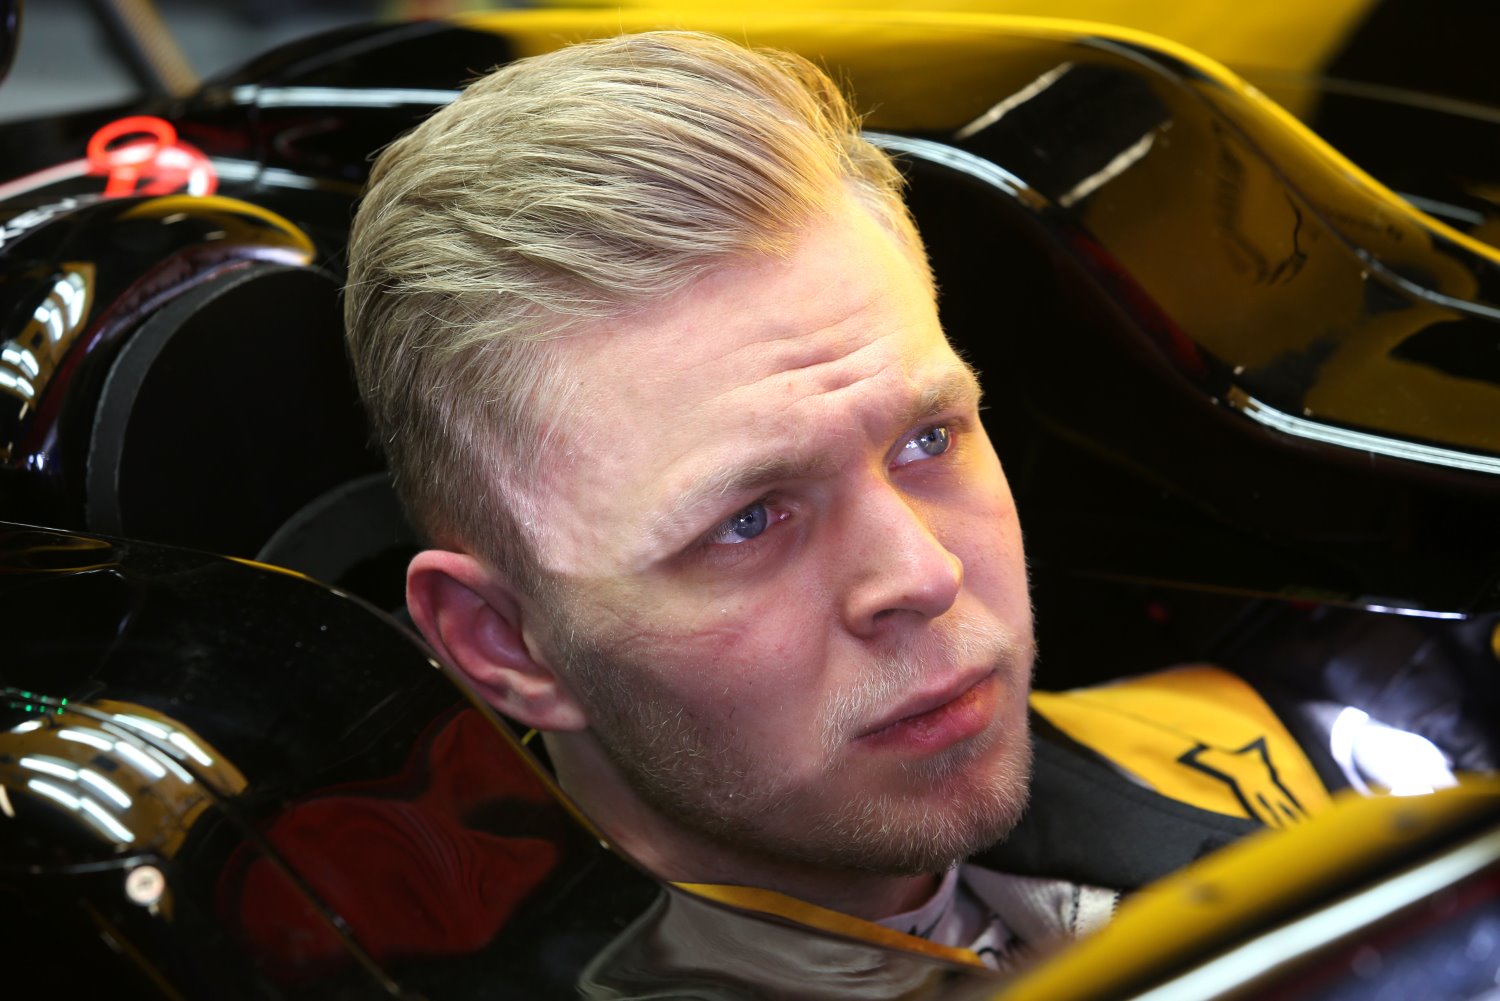 Kevin Magnussen wants to know if his check is big enough for 2017